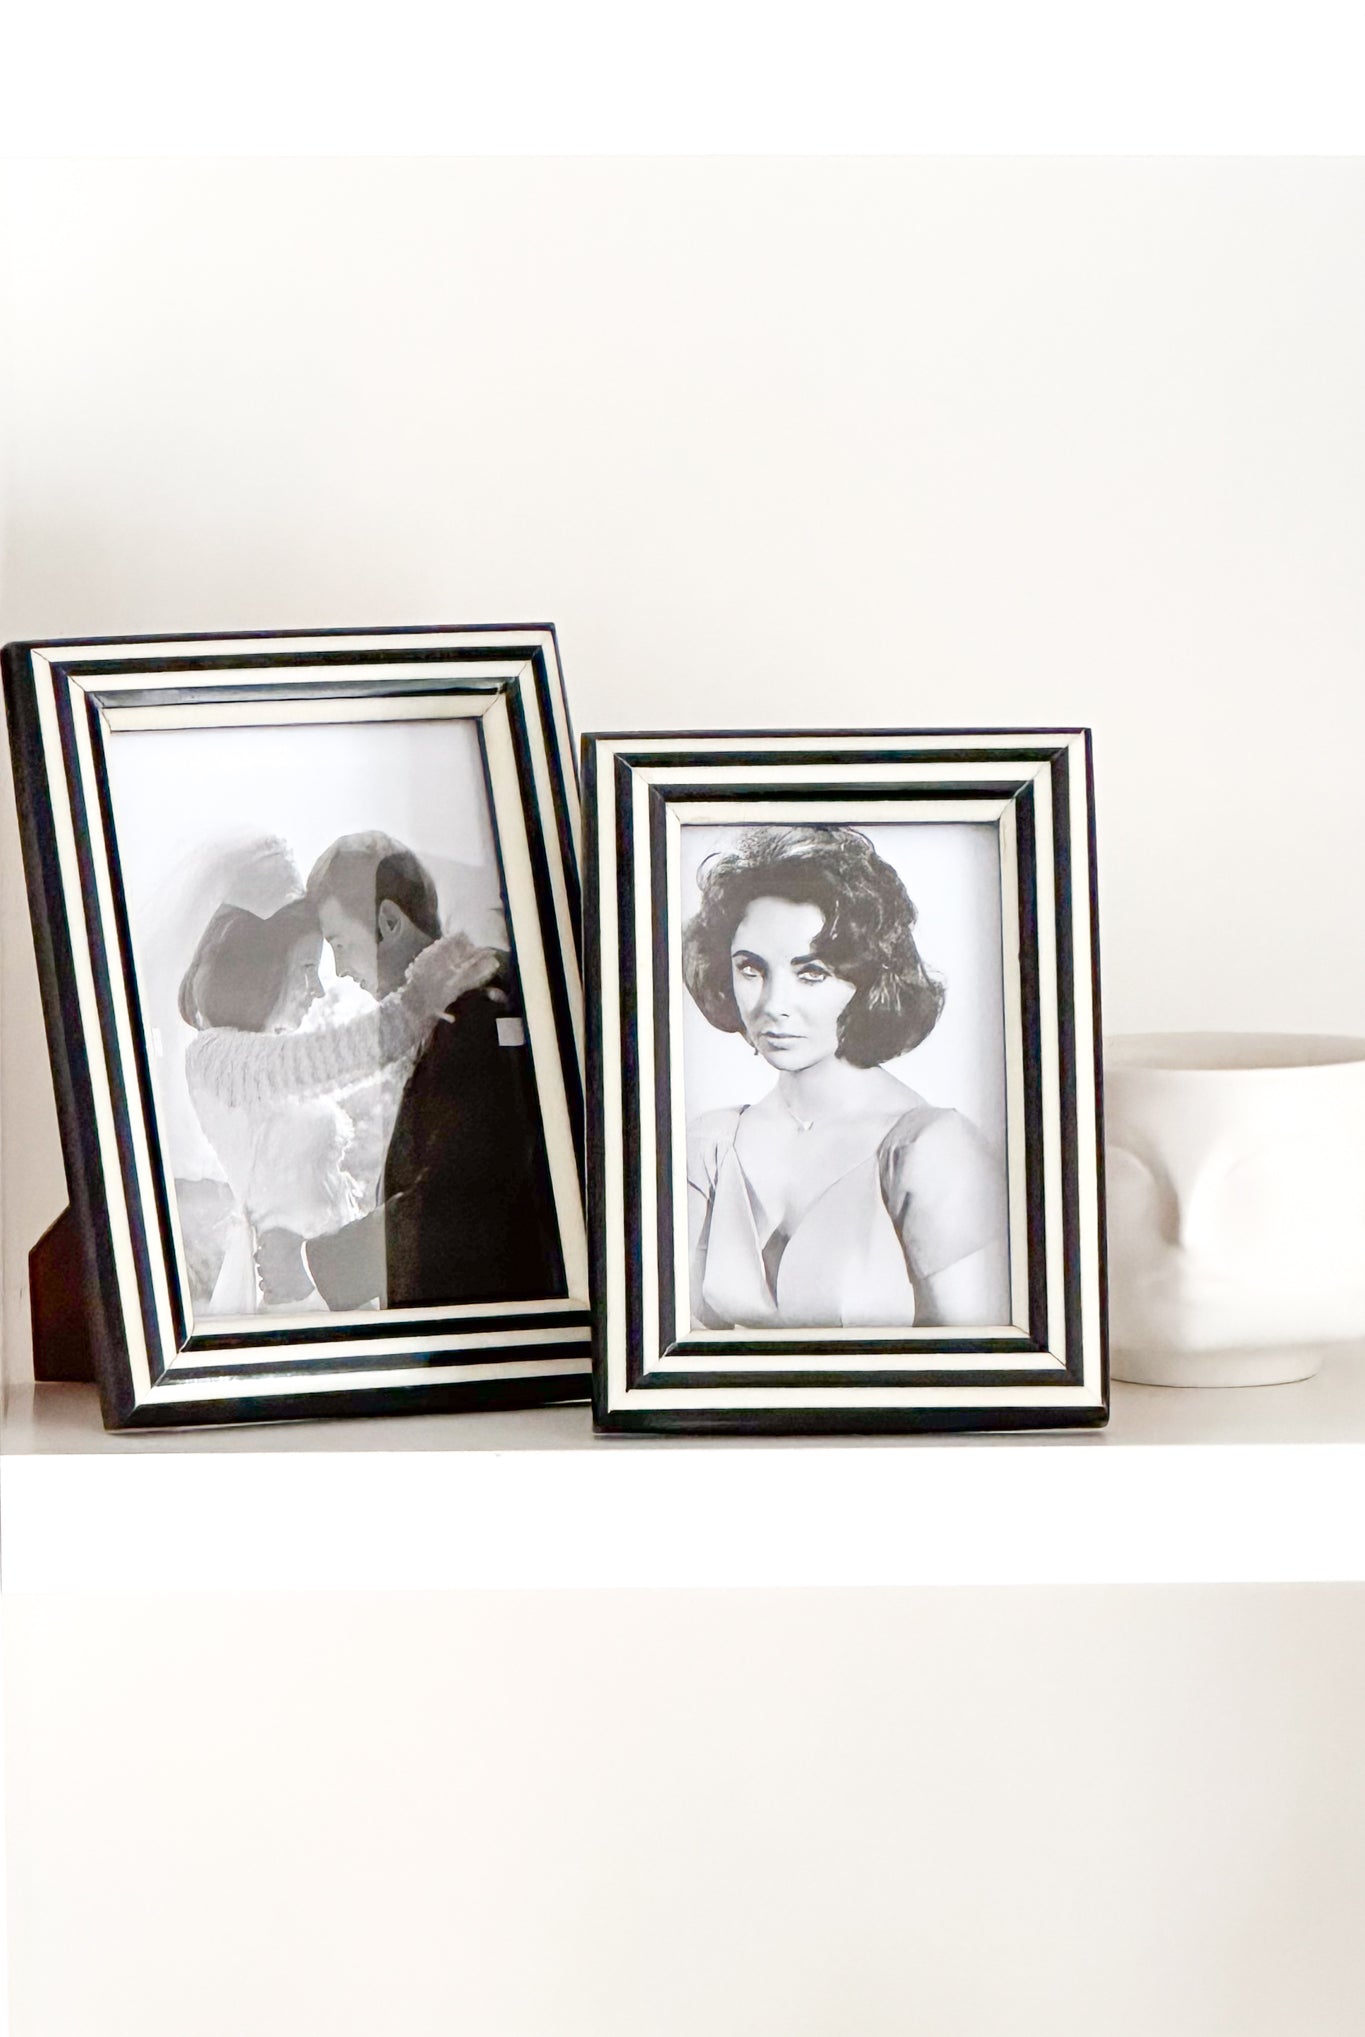 Black and Off-White Striped Resin Photo Frame 5x7 - Magpie Style